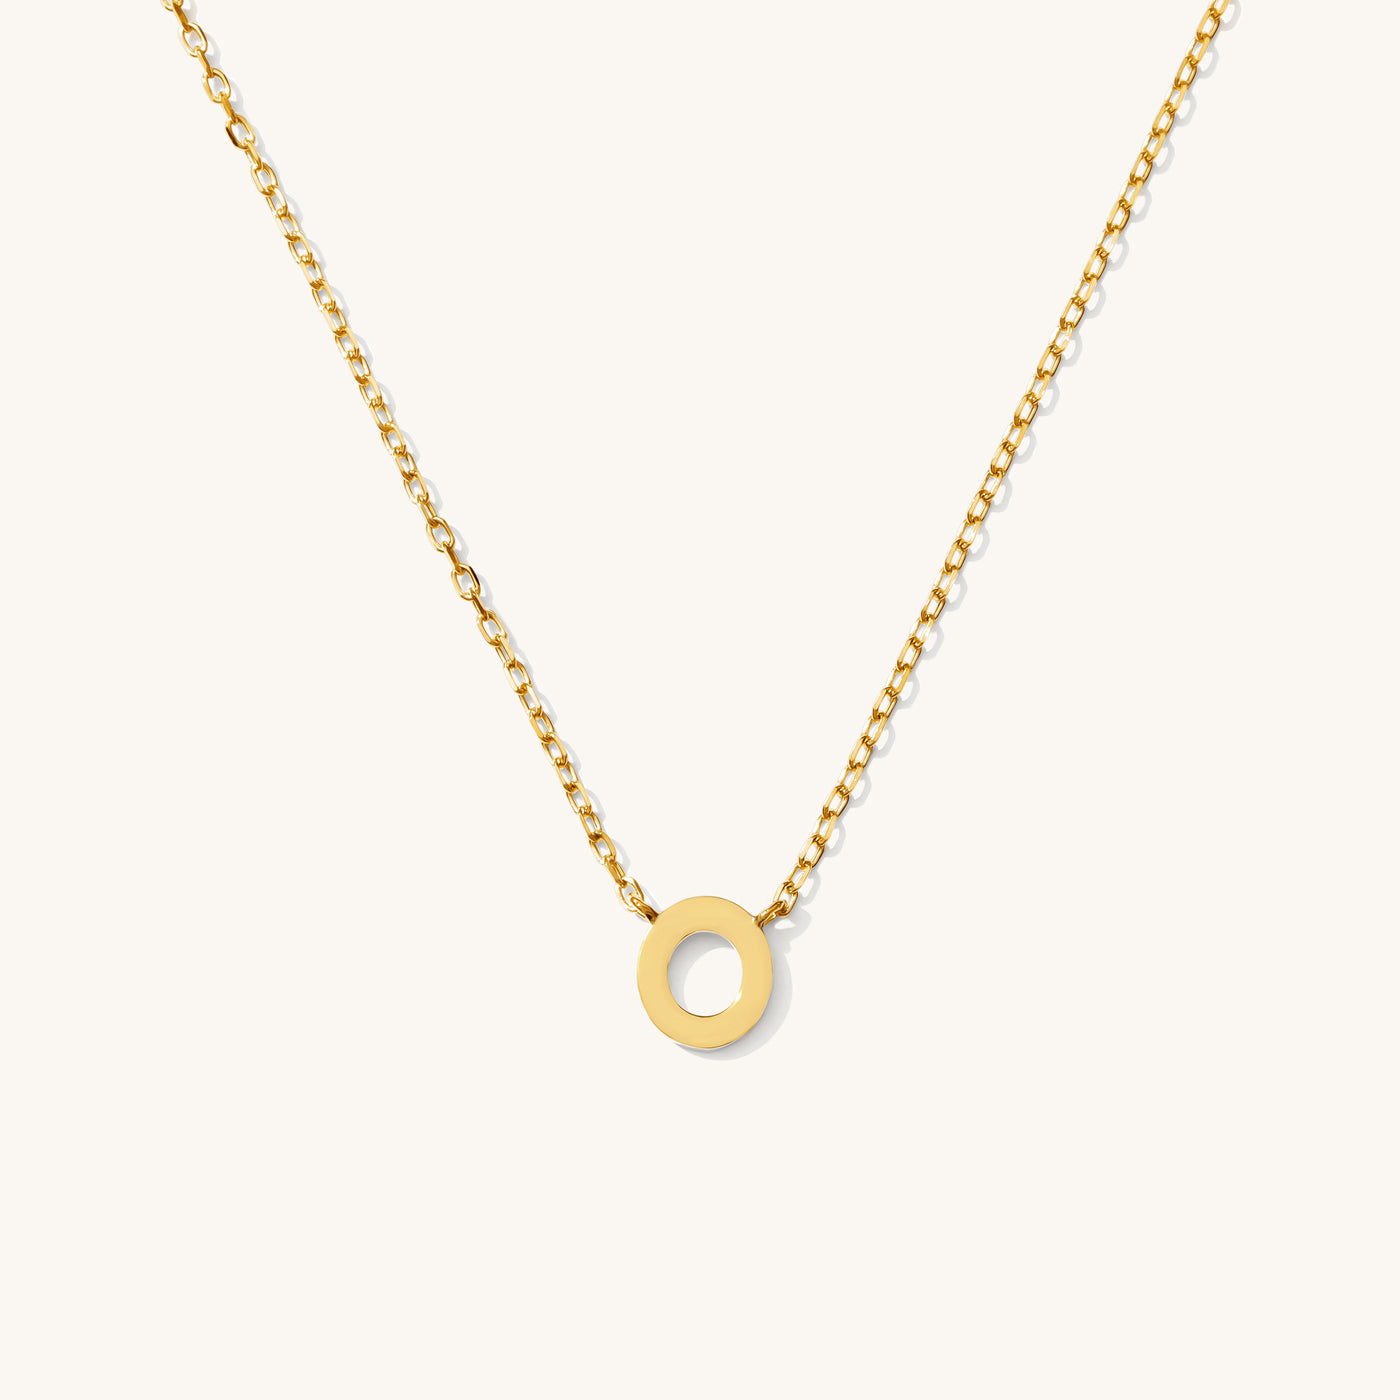 O Tiny Initial Necklace - 14k Solid Gold